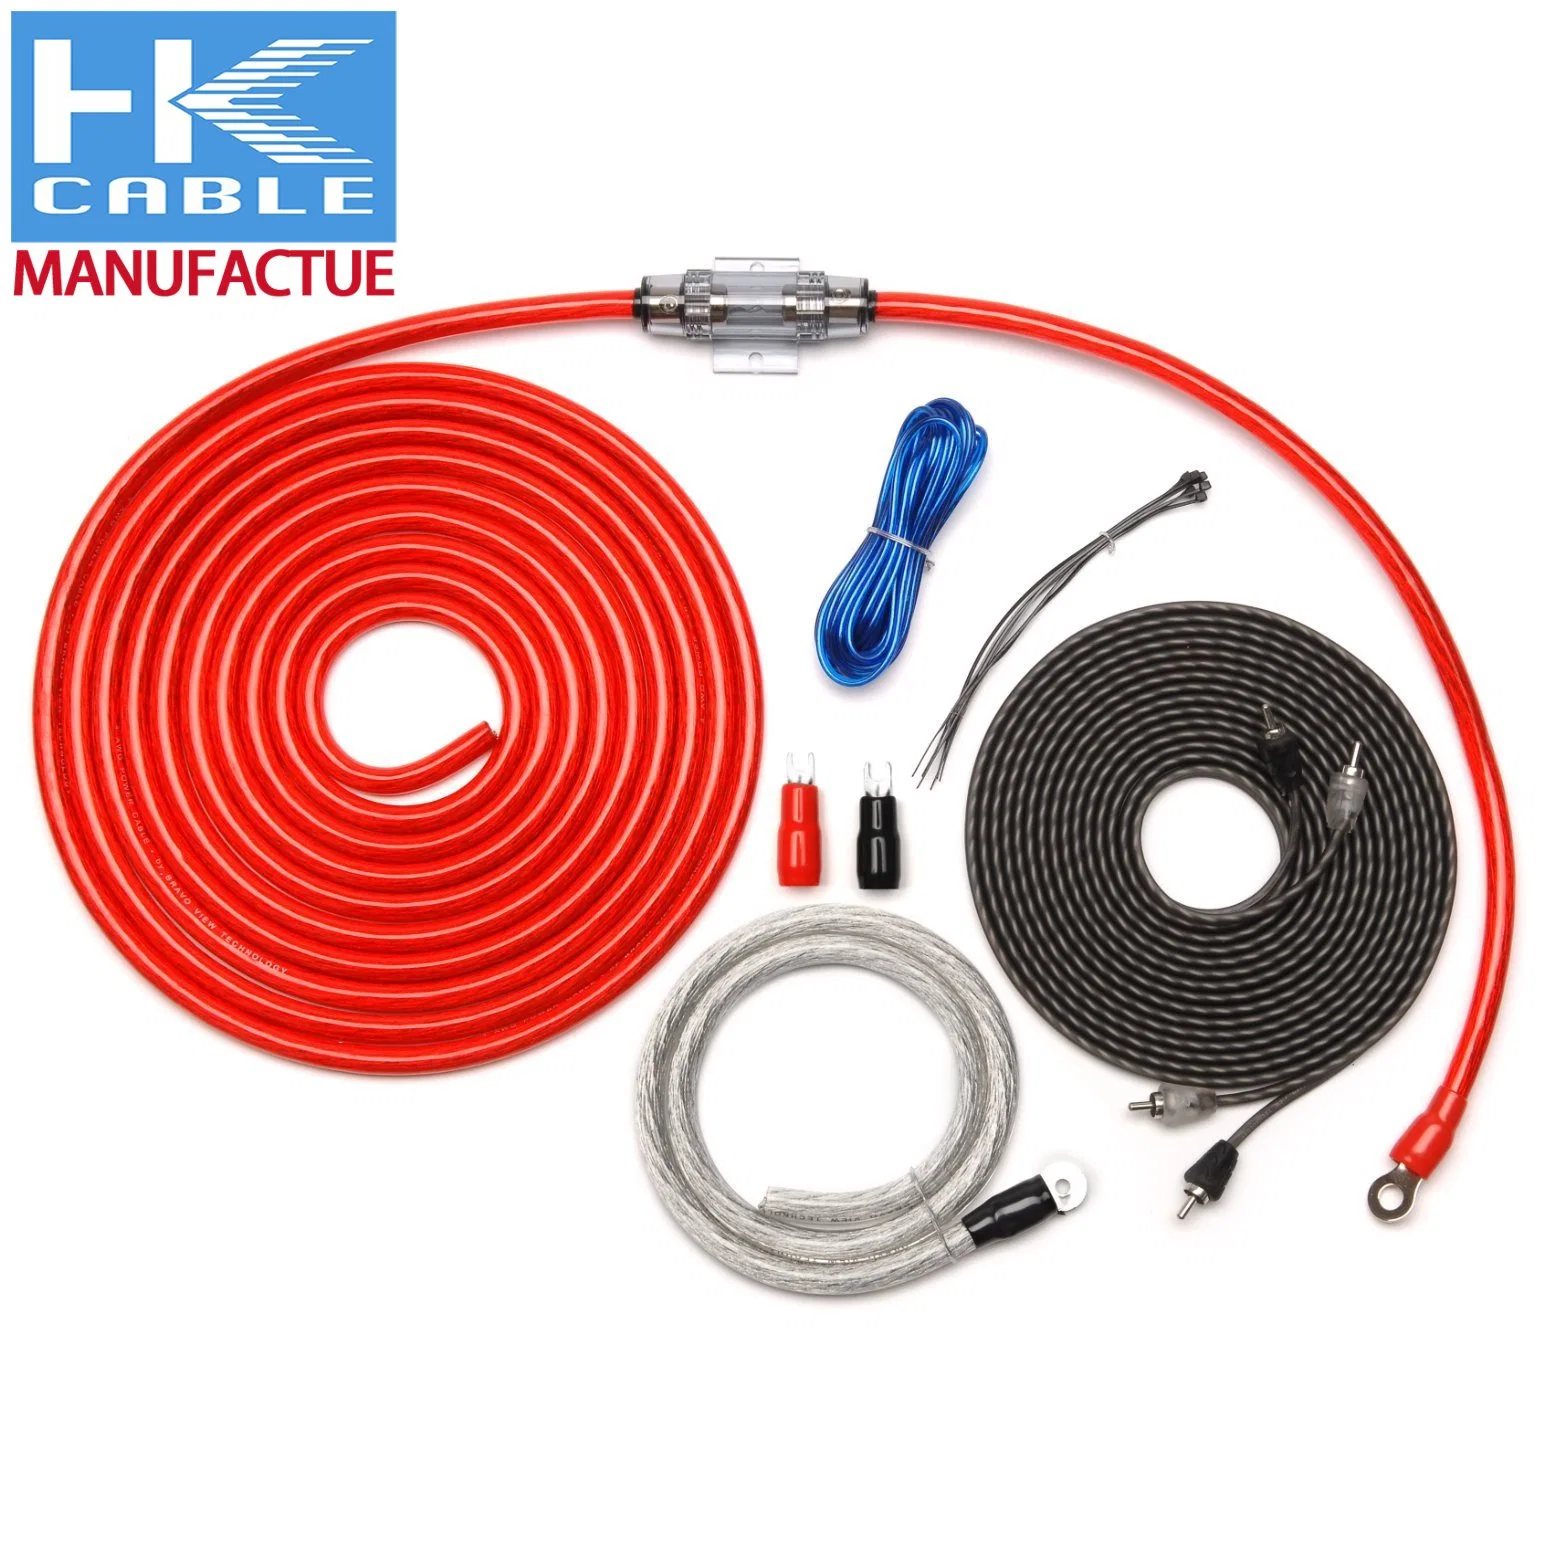 Sale China Factory manufacture Arrival 0AWG Car Audio Cable Kit Car Amplifier Wiring Kit Hard Amplifier Cable Kit